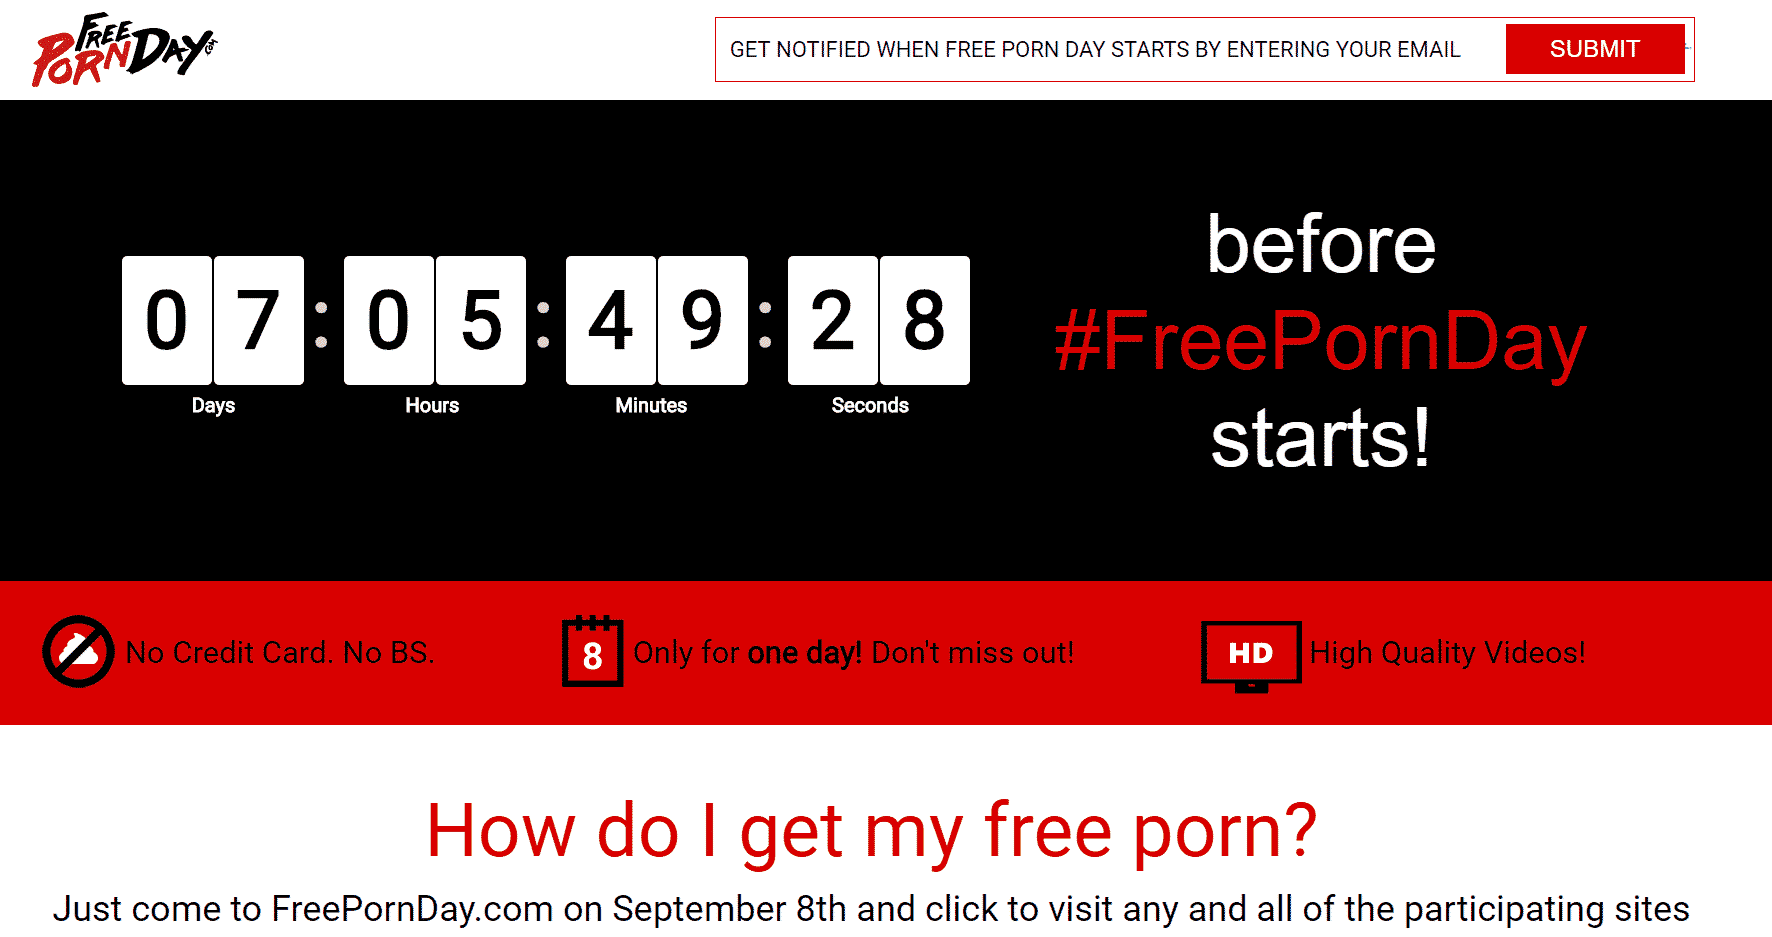 Brace yourself for free sex on freepornday - think the internet already has enough.